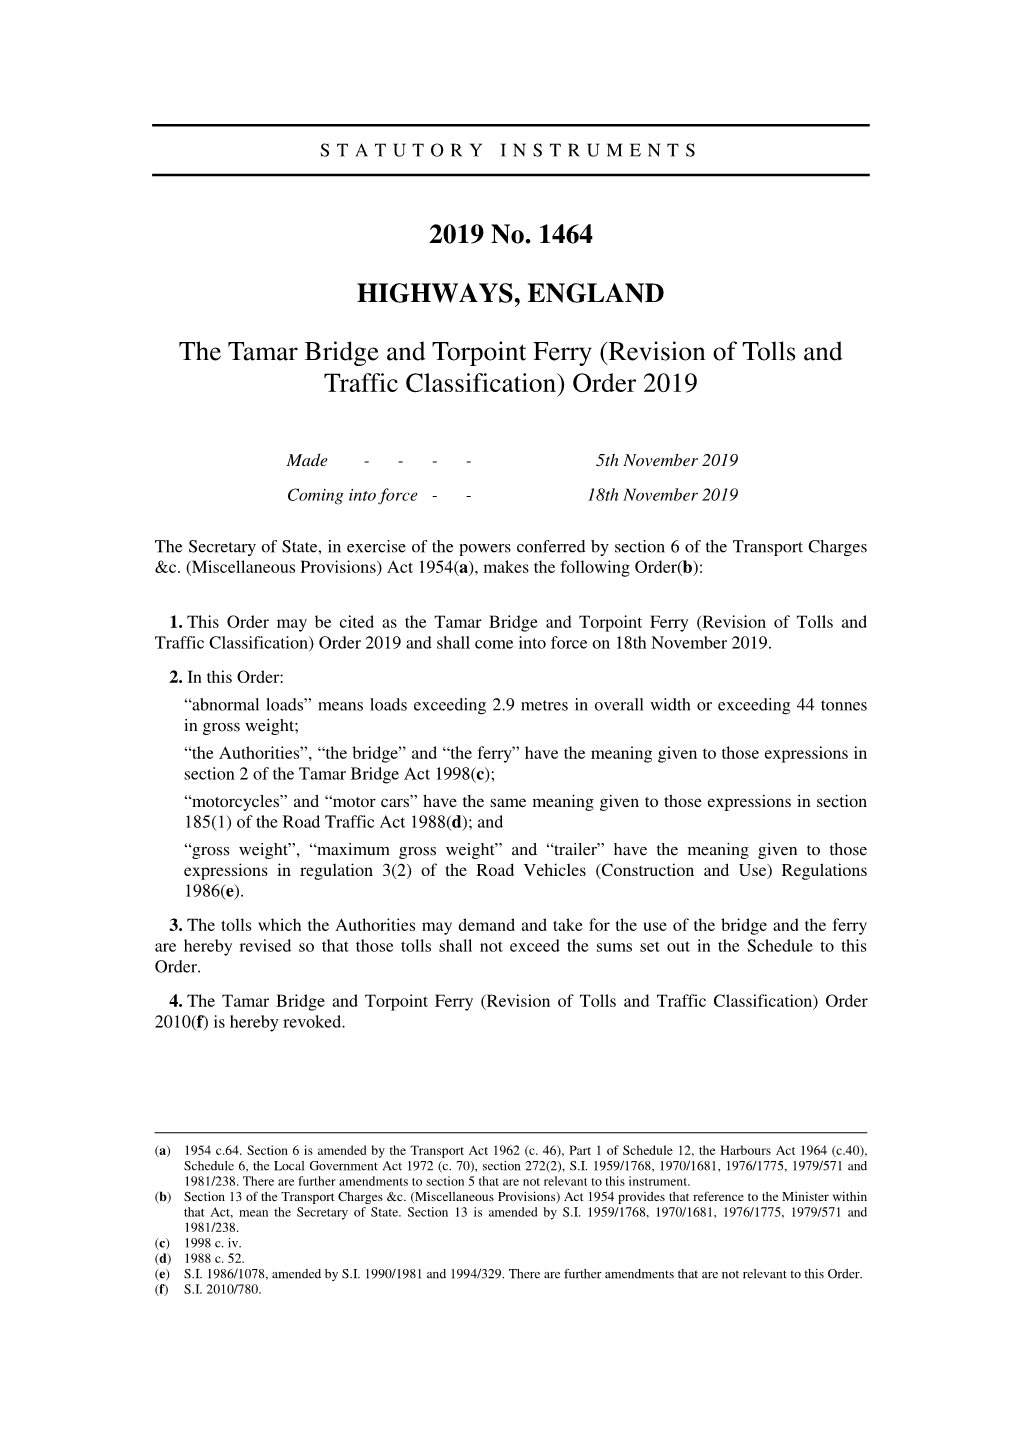 The Tamar Bridge and Torpoint Ferry (Revision of Tolls and Traffic Classification) Order 2019